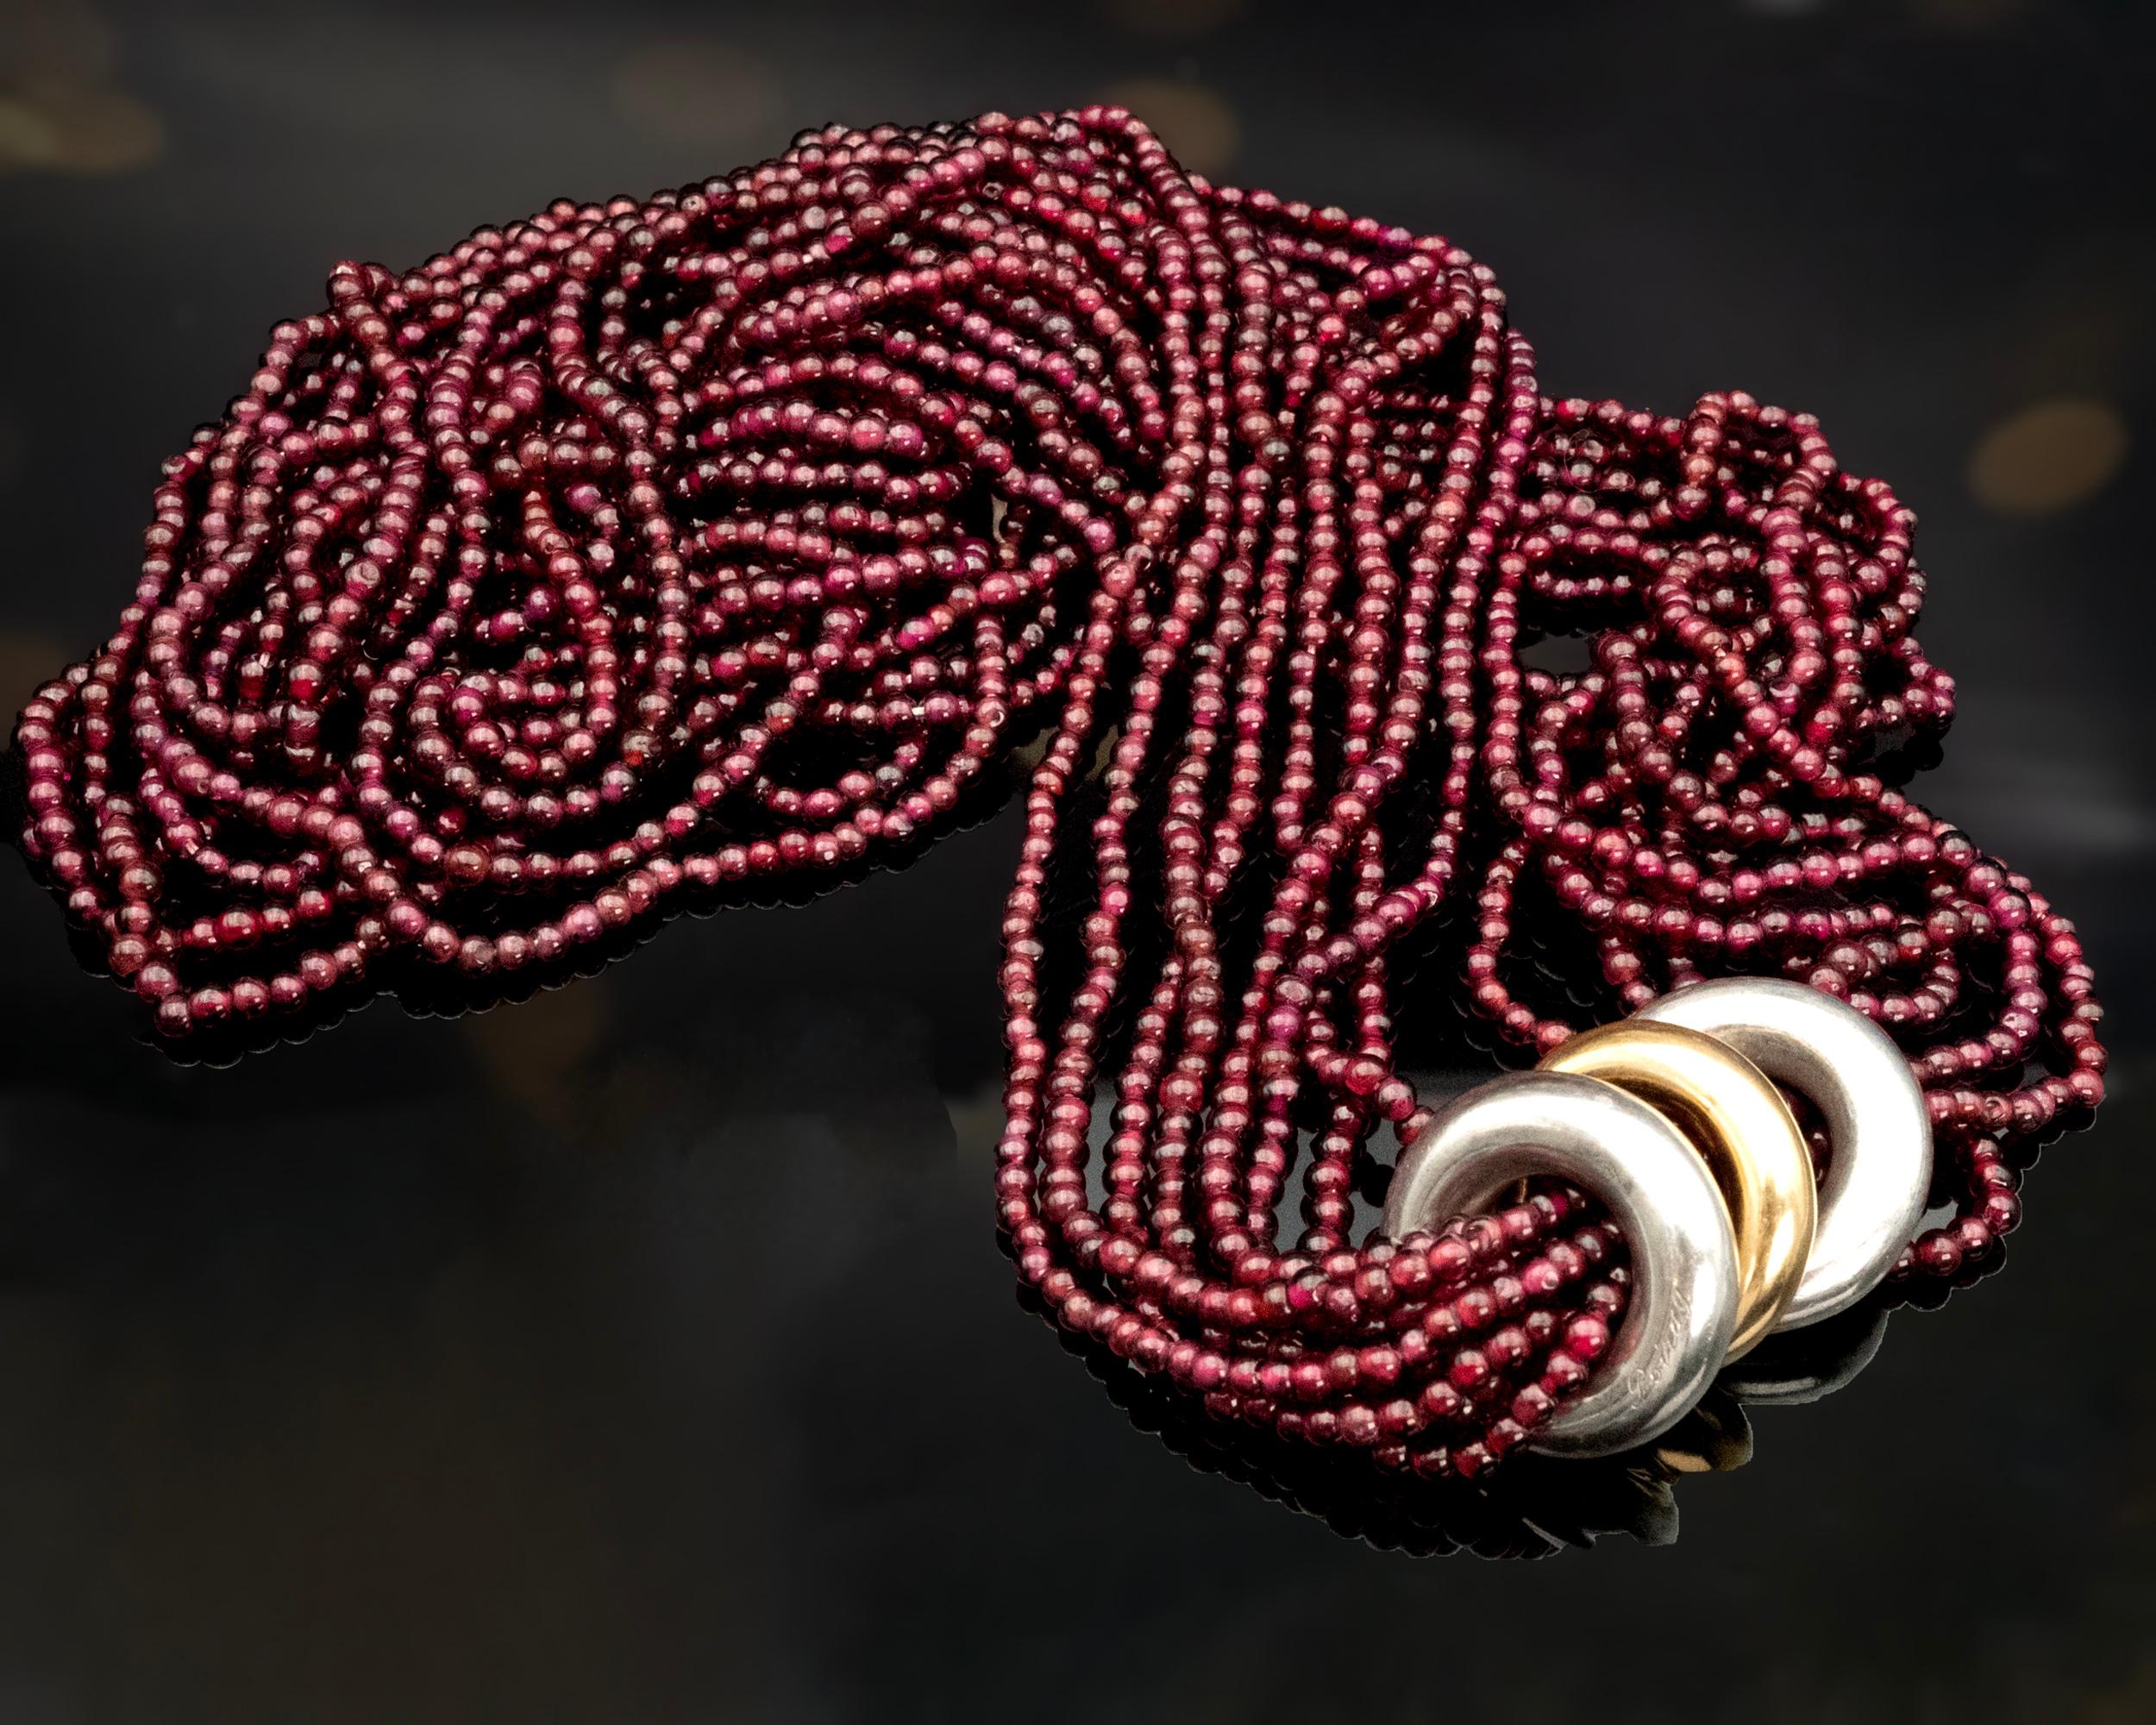 striking Multi-Strand Sautoir Necklace from the renowned fashion brand Poiray. This stunning necklace, measuring a generous 33 inches long, features eight strands of vibrant garnet beads. Adding to its allure, three hefty 